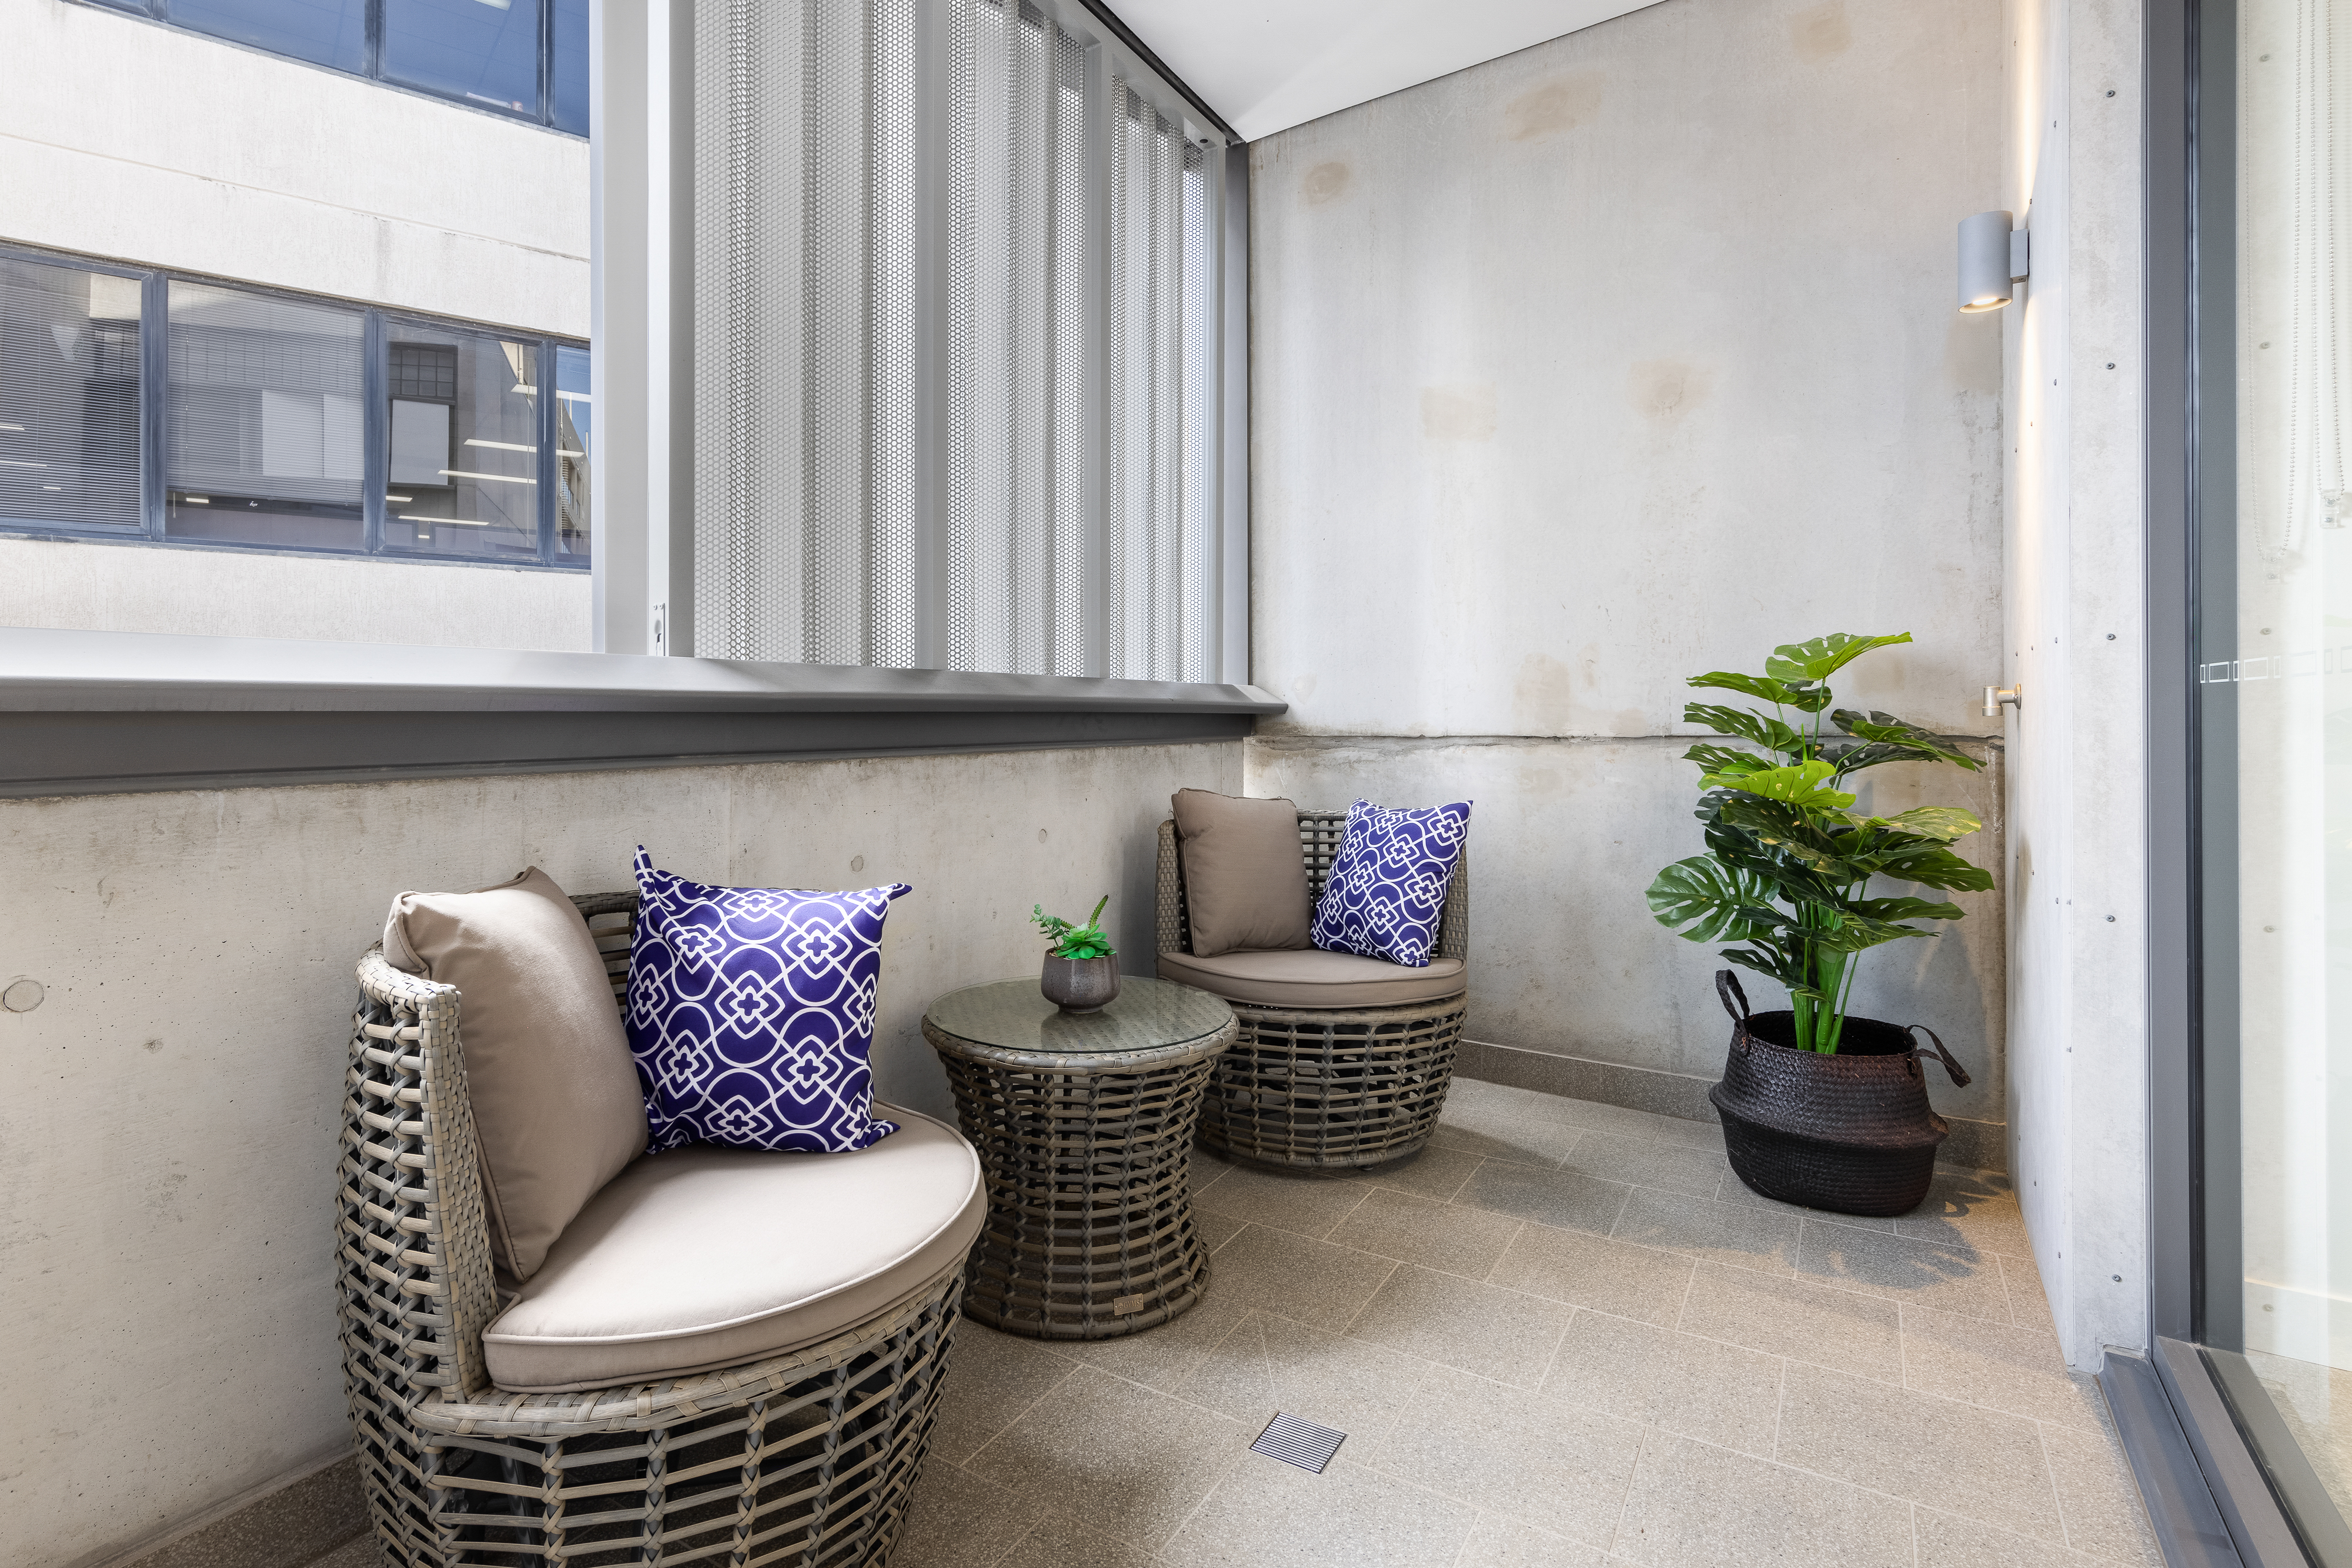 Balcony, - One Bedroom Apartment - Urban Rest - The Surry Apartments - Sydney